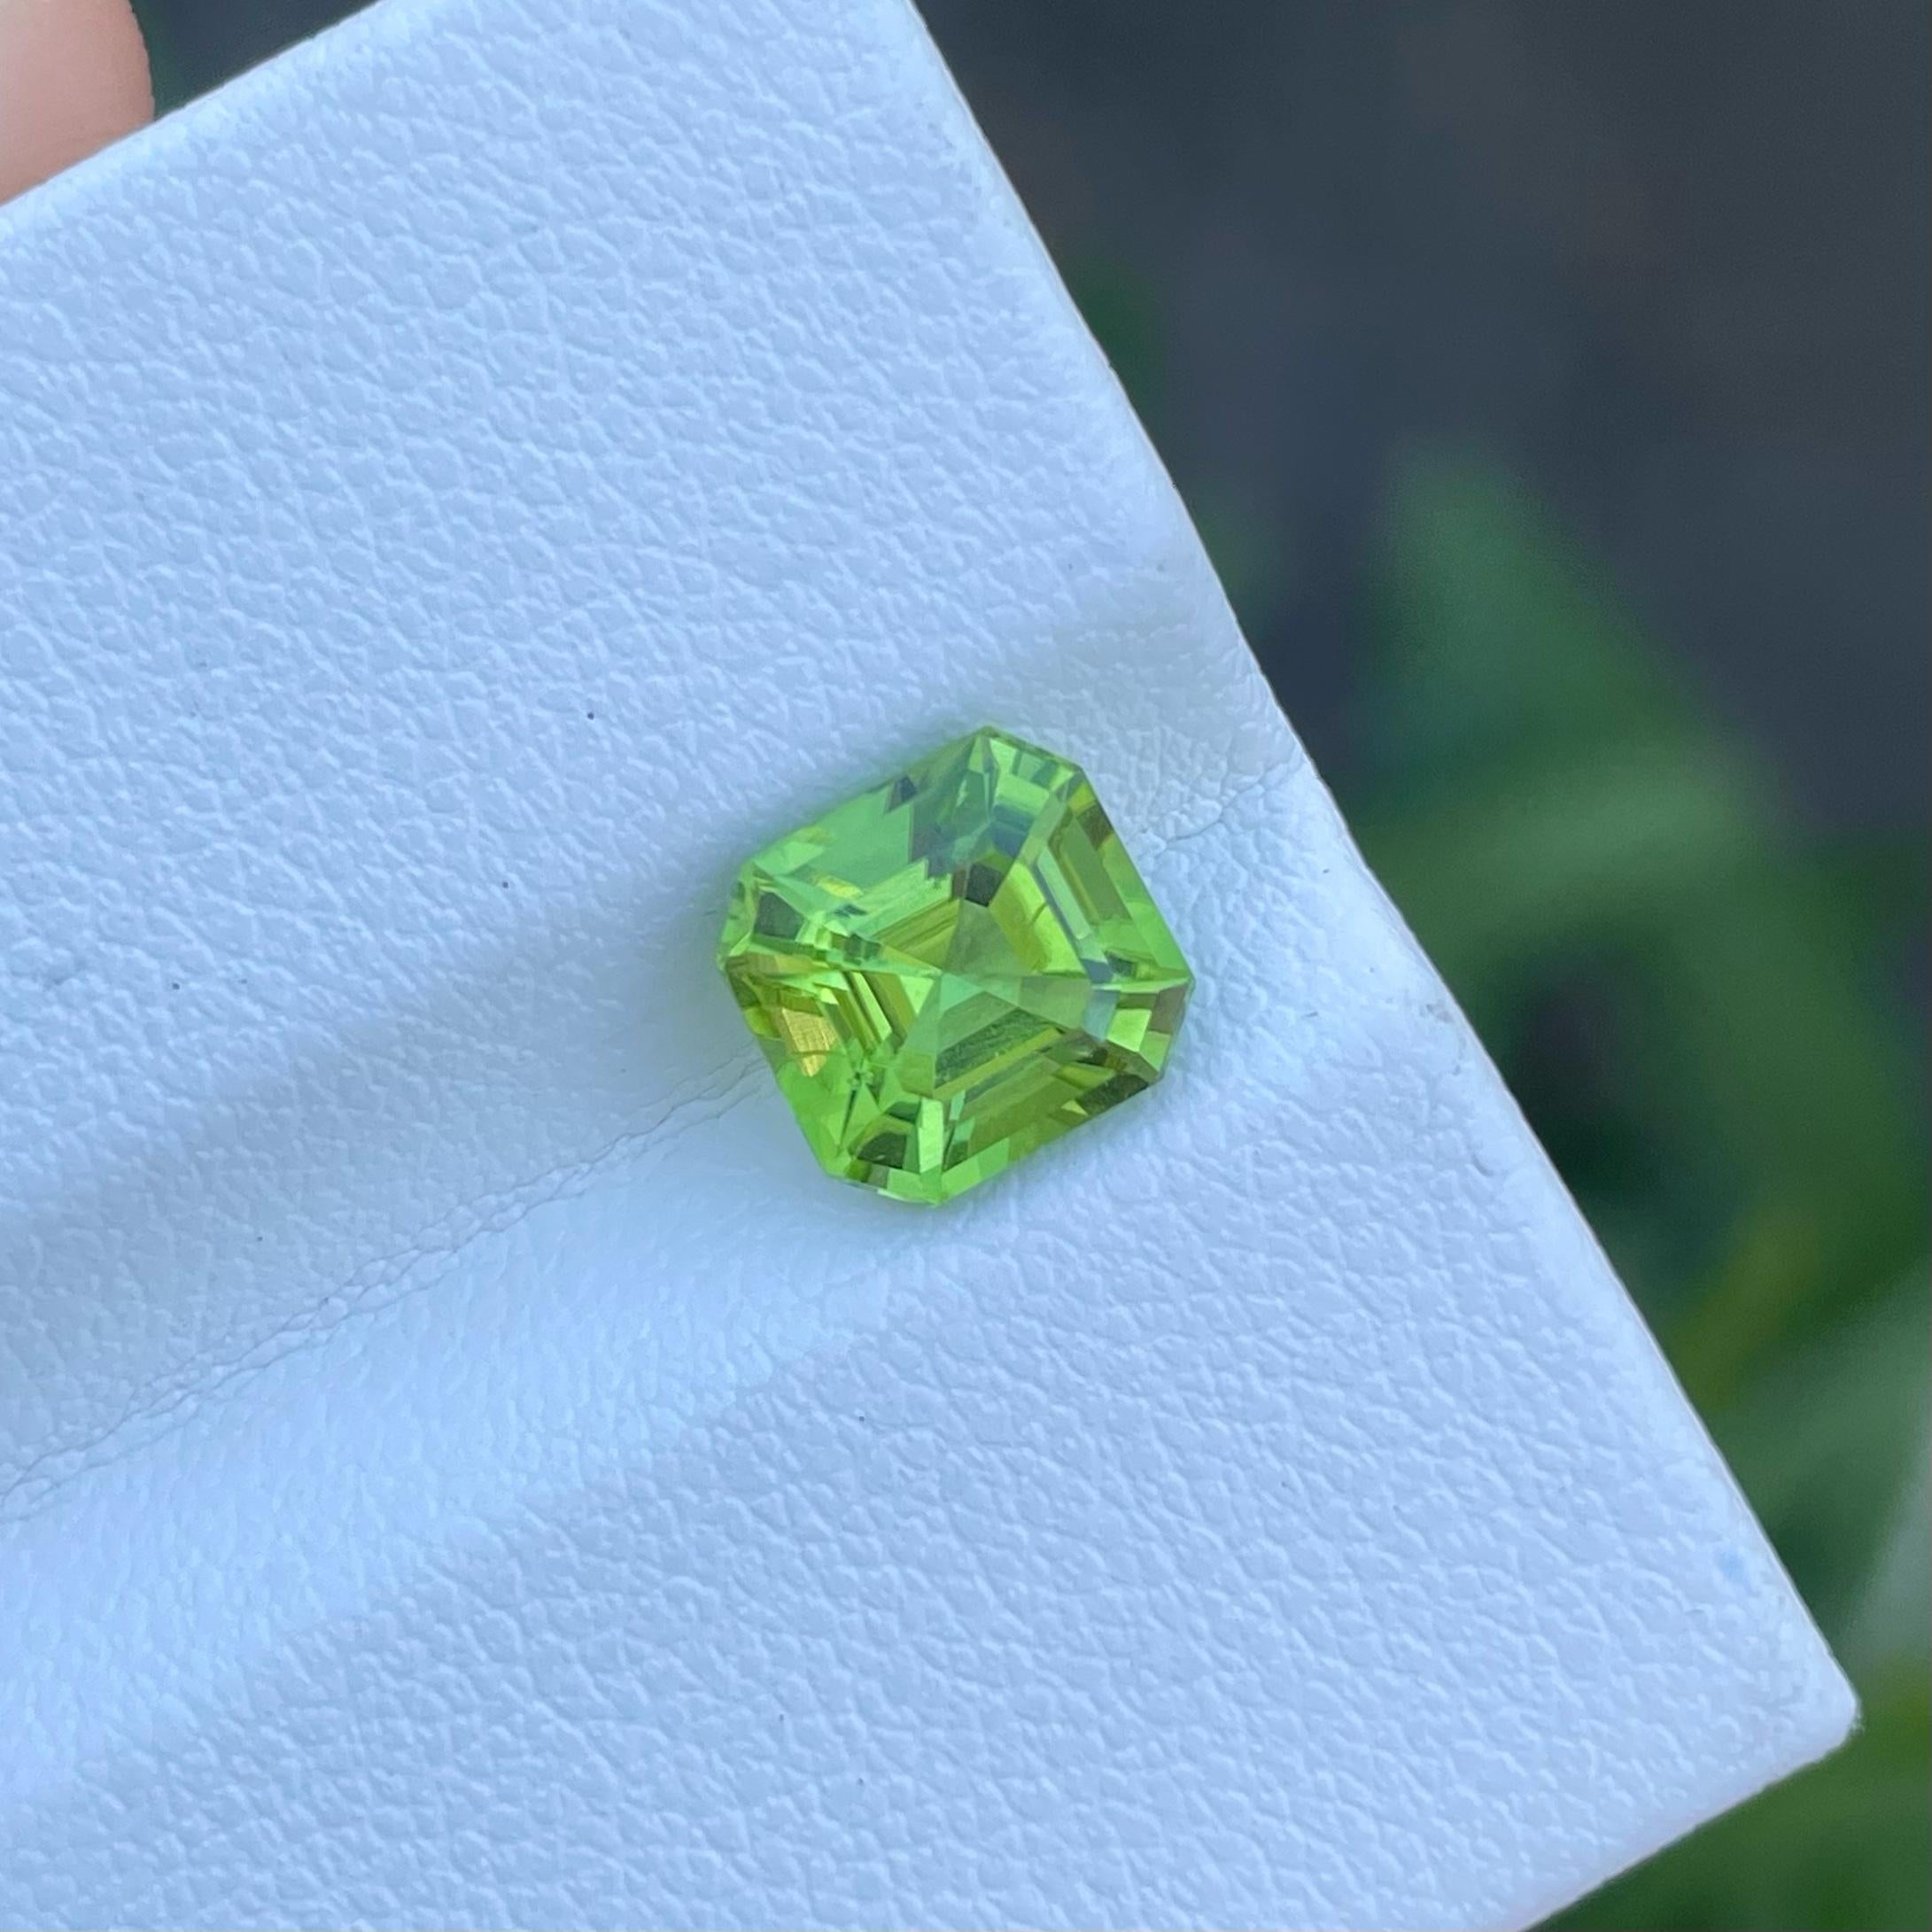 Modern The Luminous Beauty of Apple Green Peridot Stones A Sparkle of Nature's Renewal